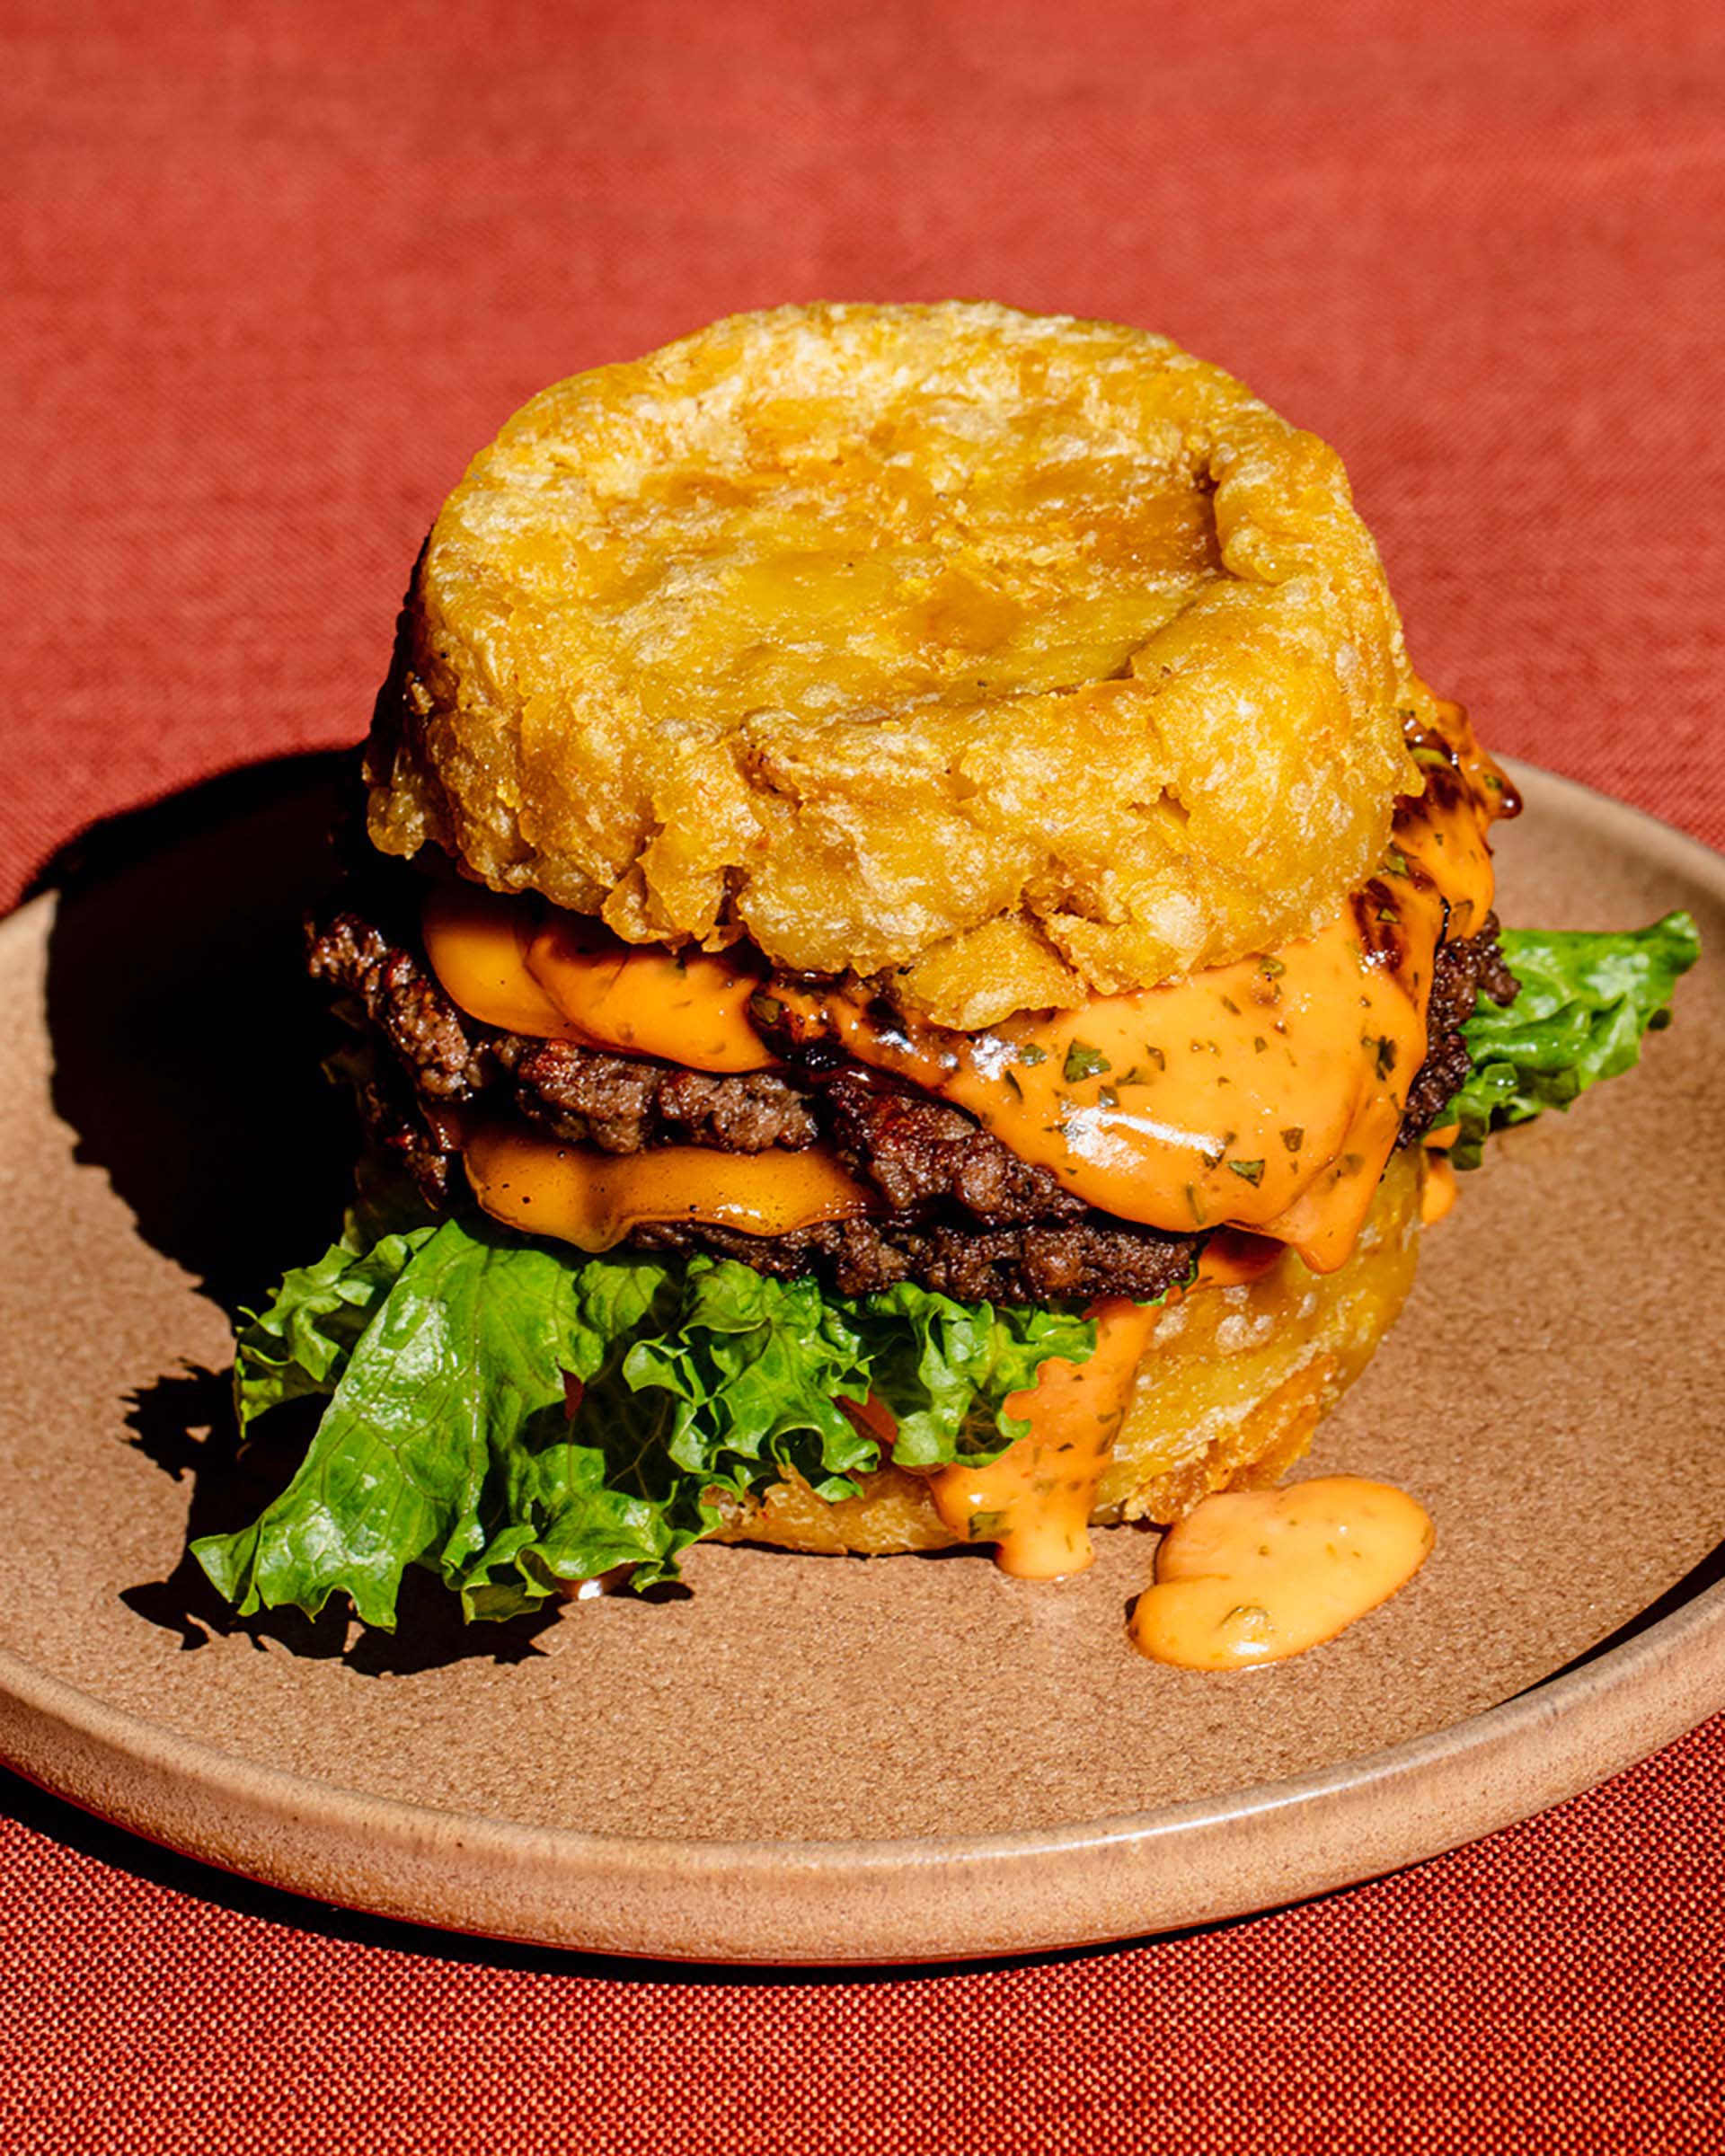 A vegan burger with mofongo (fried mashed plantains) serving as the bun.